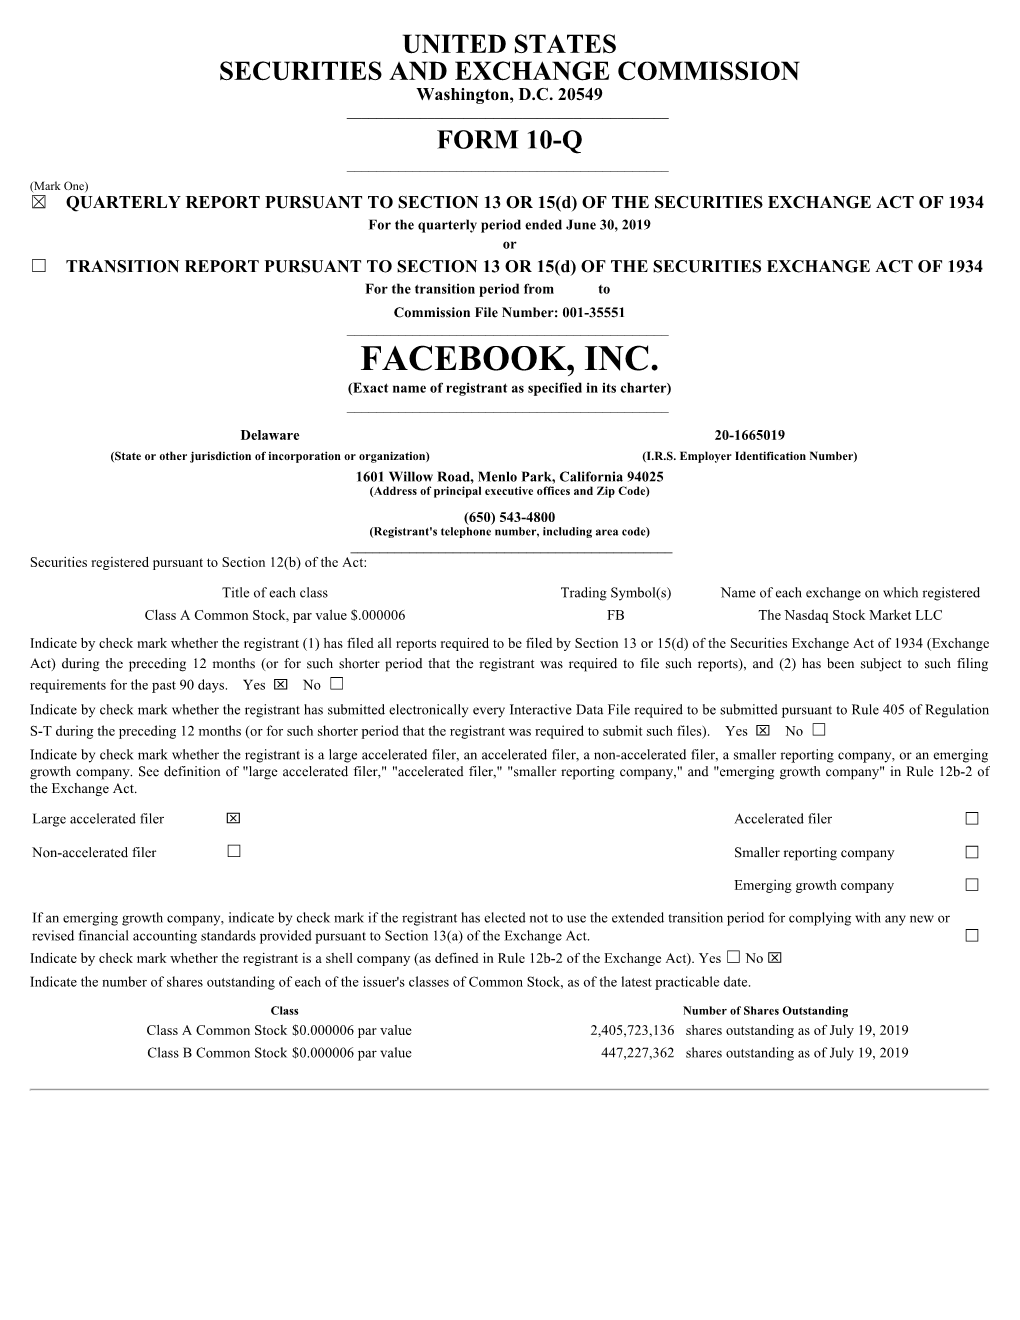 FACEBOOK, INC. (Exact Name of Registrant As Specified in Its Charter) ______